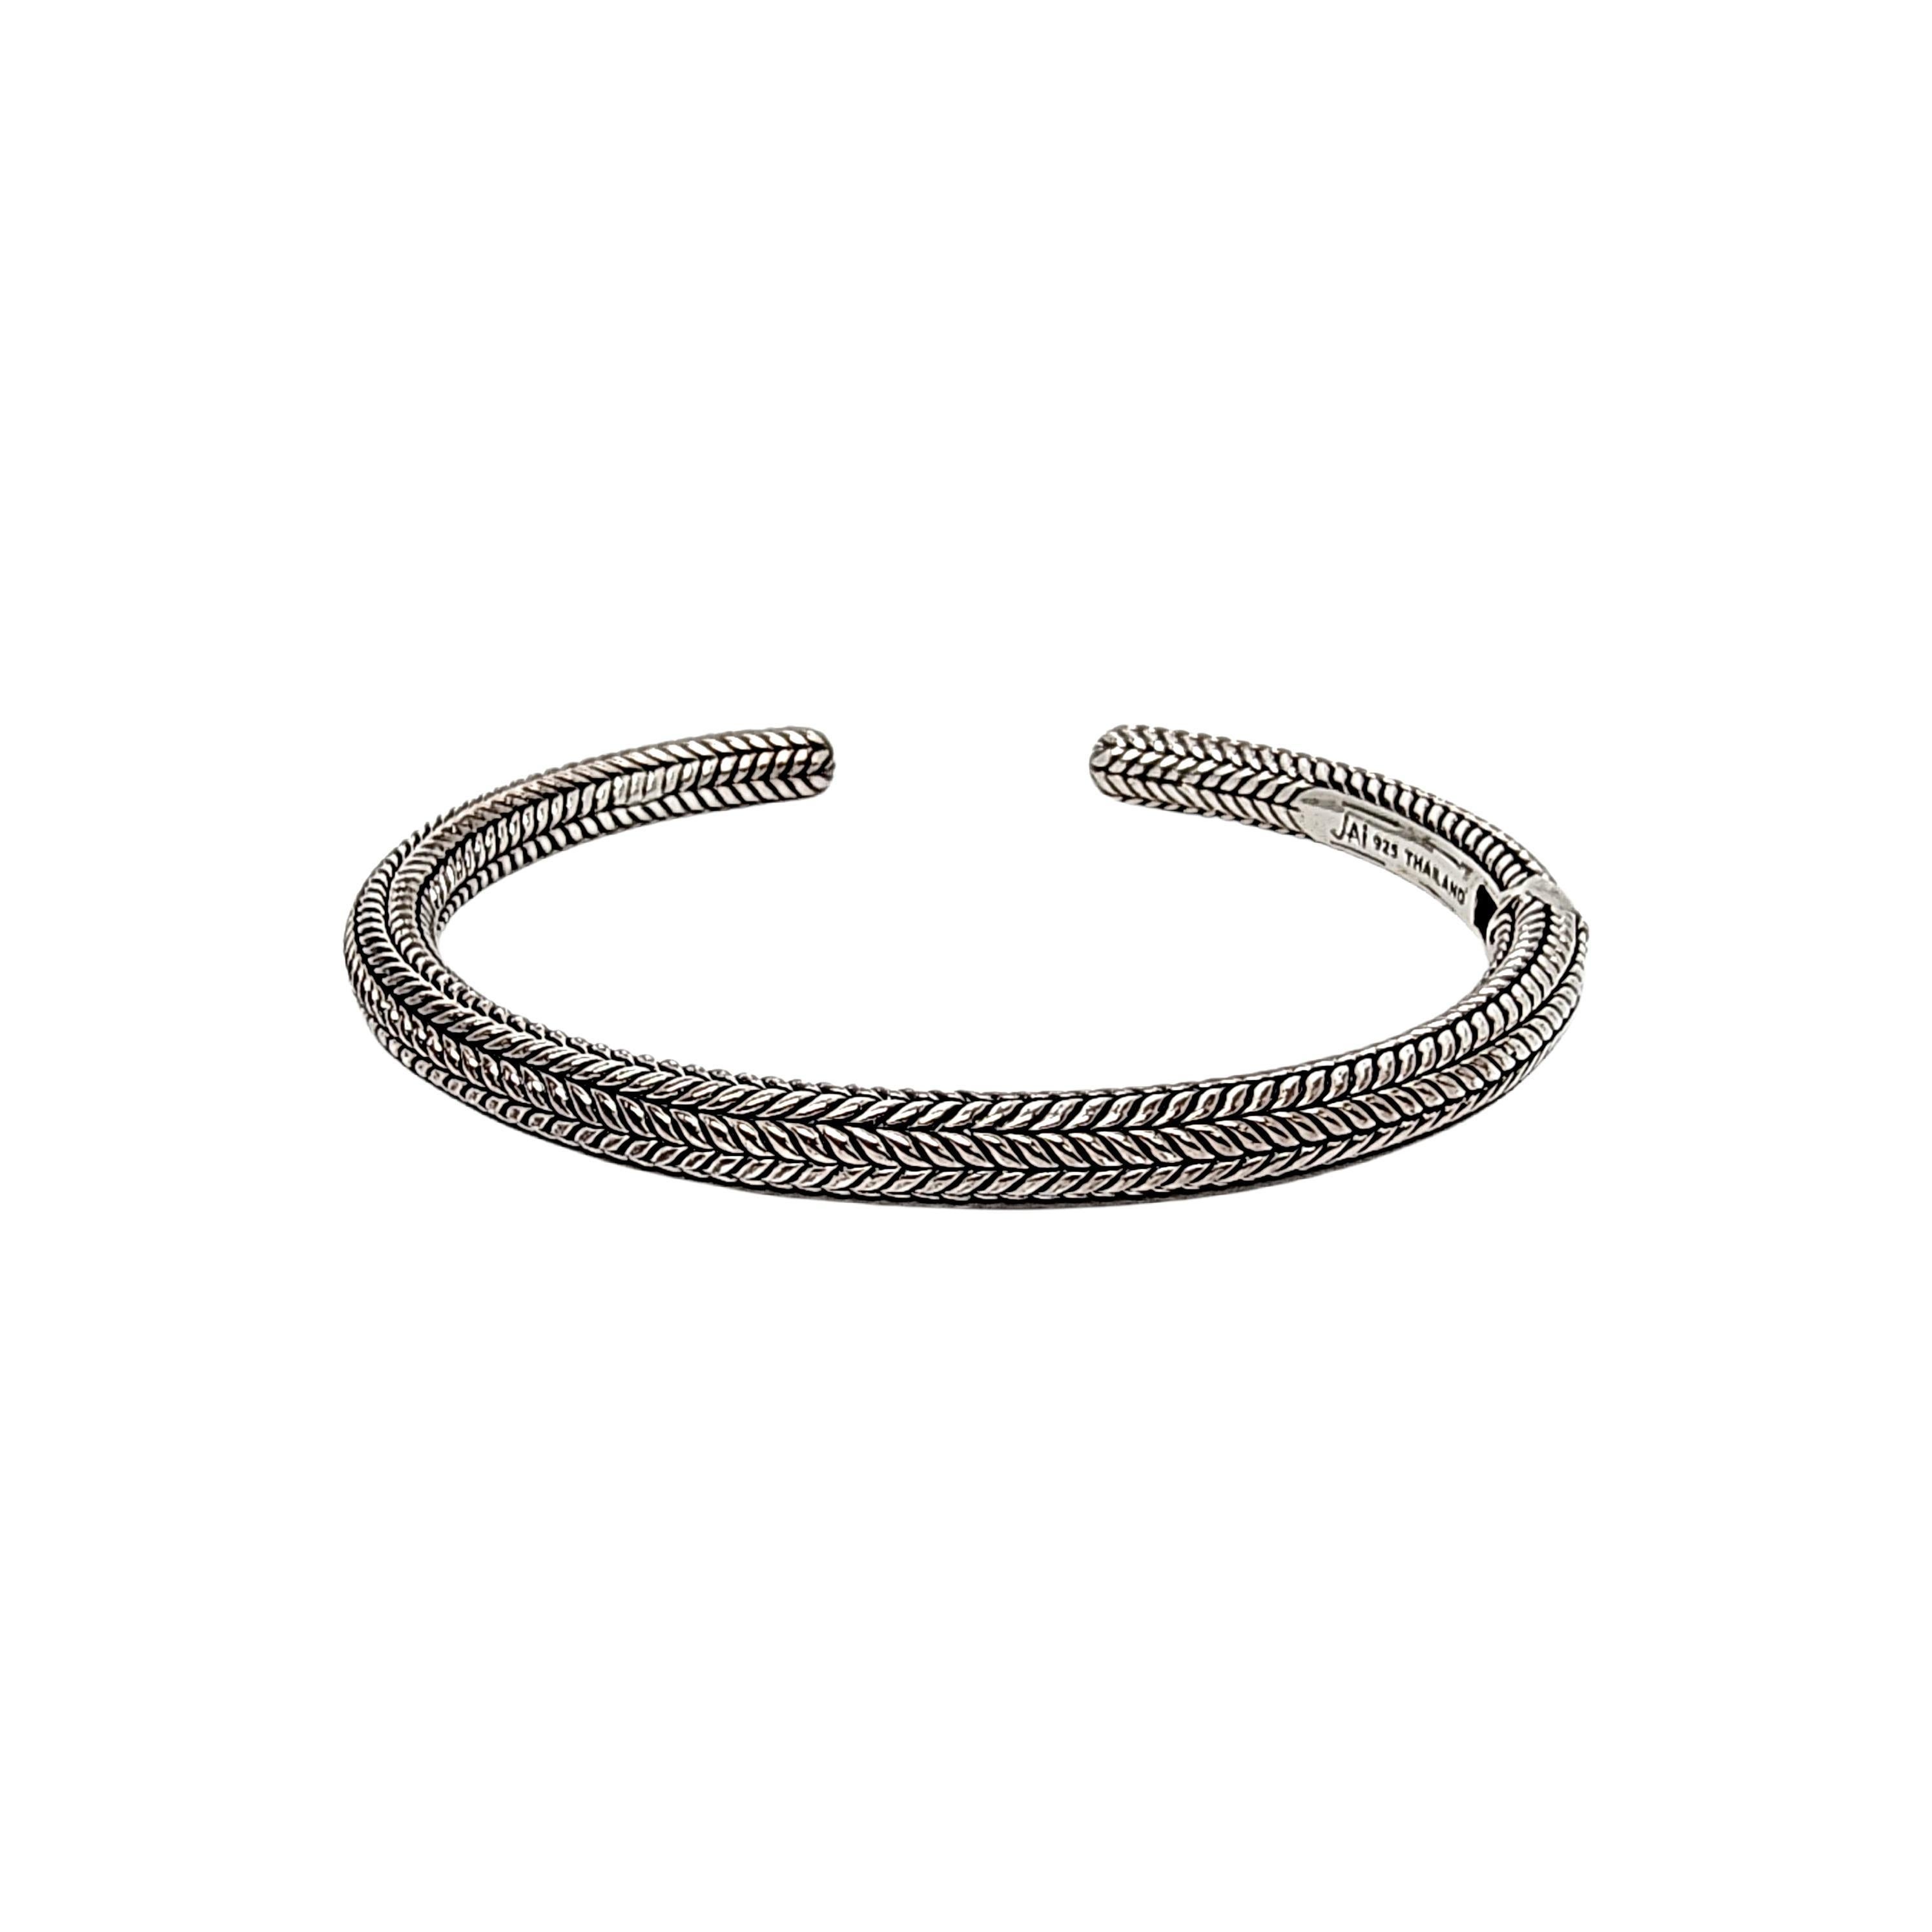 Sterling silver woven hinged cuff bracelet by JAI for John Hardy.

From the affordable line JAI by John Hardy for QVC, this cuff bracelet features a hinge for easy on and off and woven wheat-like design.

Measures approx 6 3/4